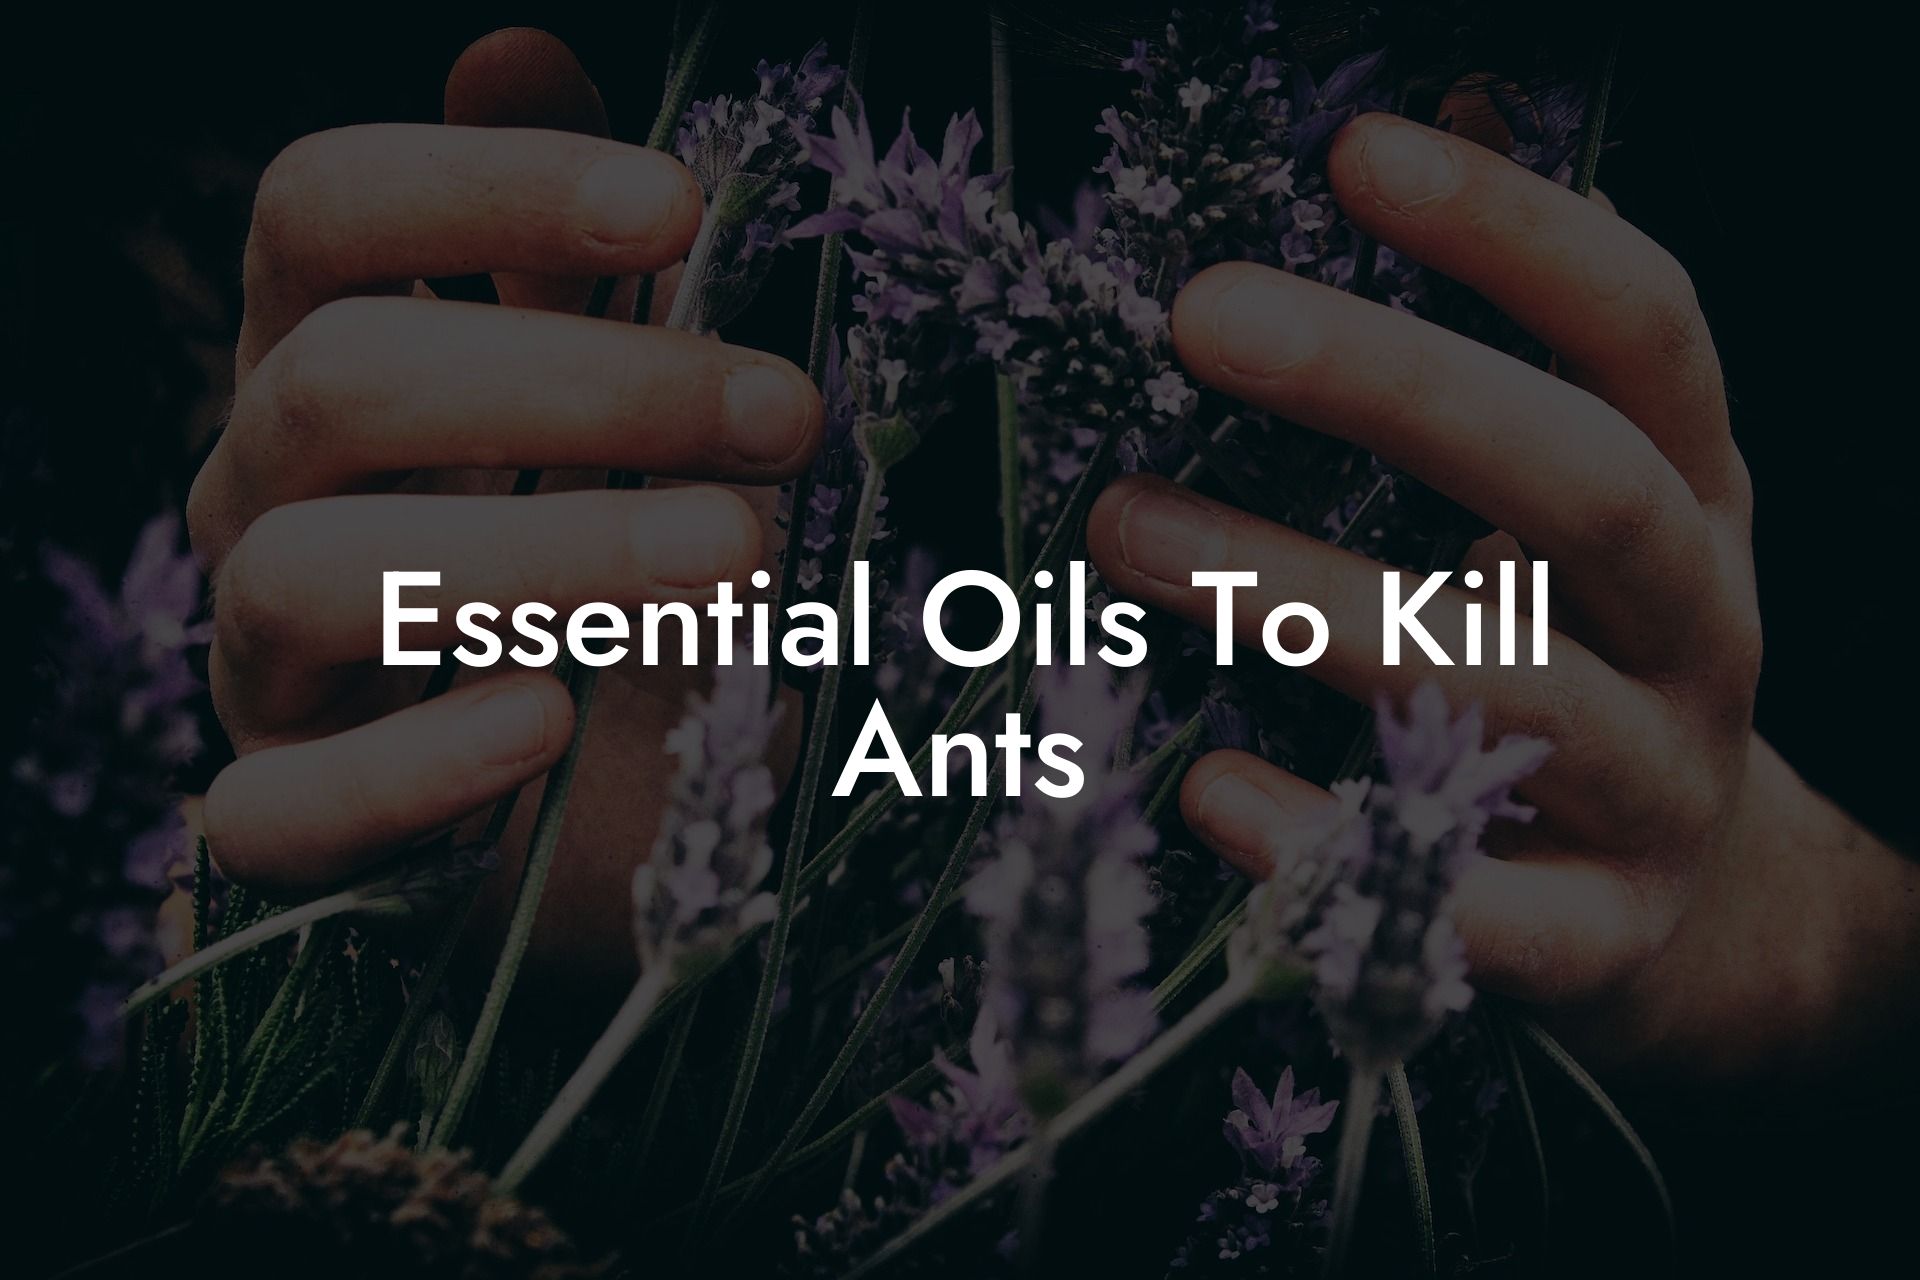 Essential Oils To Kill Ants